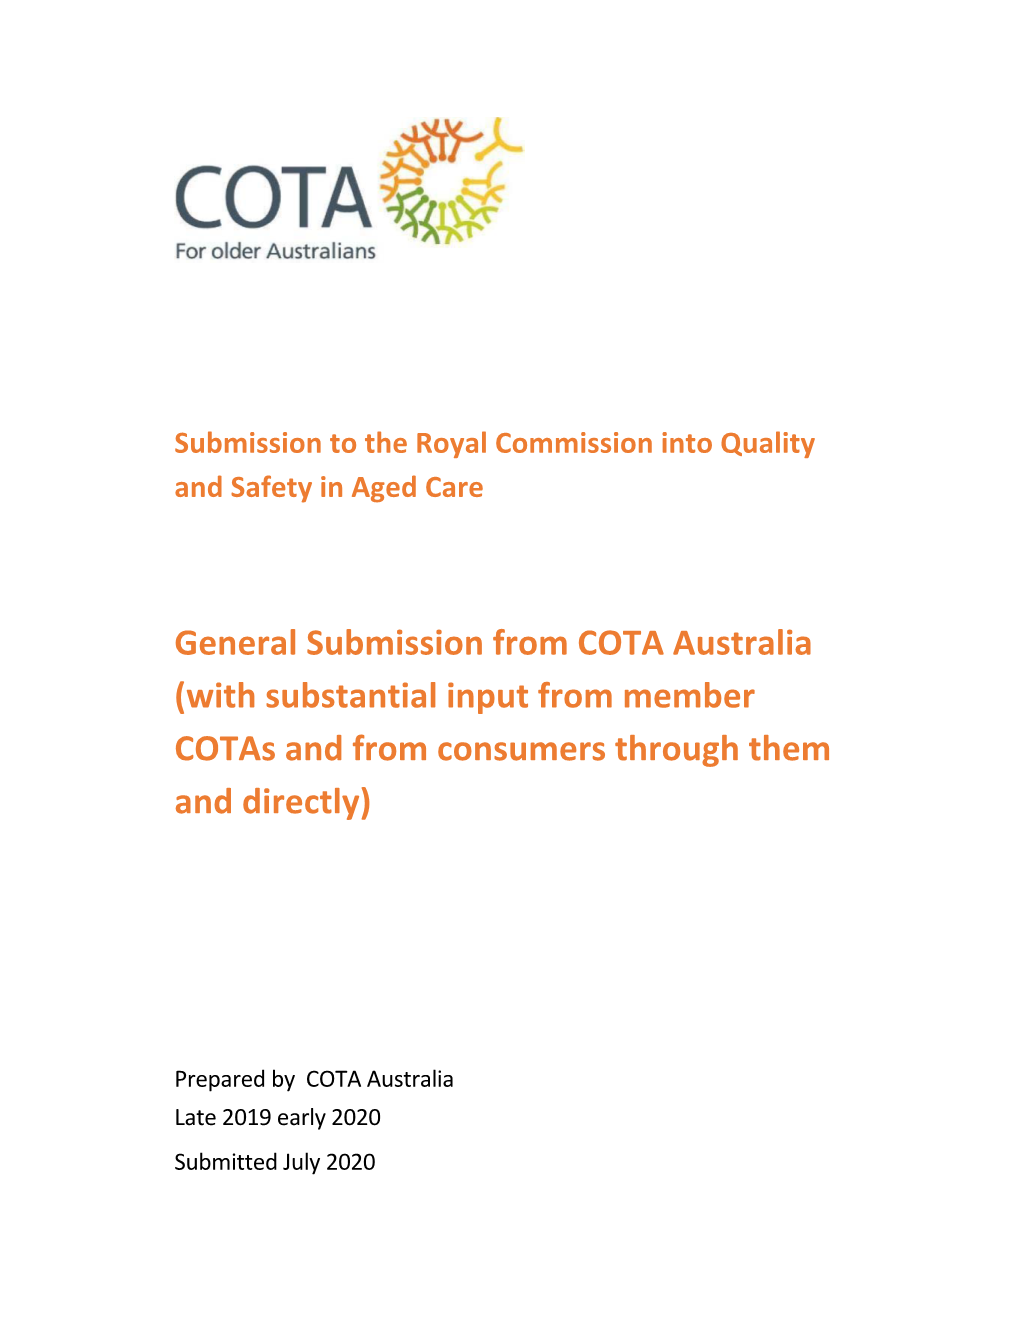 General Submission from COTA Australia (With Substantial Input from Member Cotas and from Consumers Through Them and Directly)